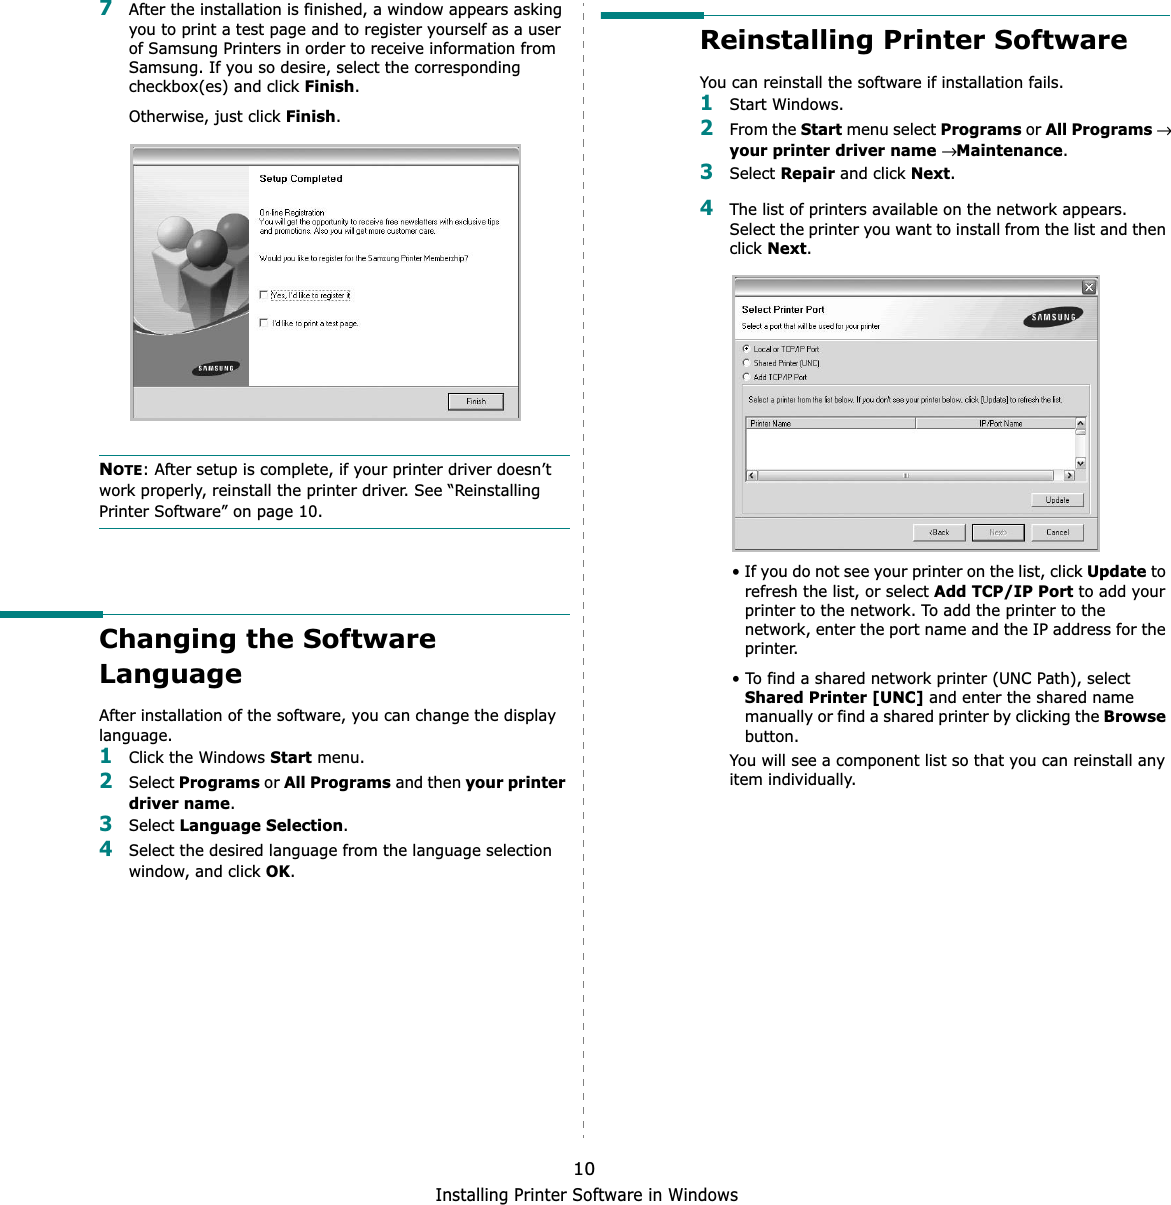 Installing Printer Software in Windows107After the installation is finished, a window appears asking you to print a test page and to register yourself as a user of Samsung Printers in order to receive information from Samsung. If you so desire, select the corresponding checkbox(es) and click Finish.Otherwise, just click Finish.NOTE: After setup is complete, if your printer driver doesn’t work properly, reinstall the printer driver. See “Reinstalling Printer Software” on page 10.Changing the Software LanguageAfter installation of the software, you can change the display language.1Click the Windows Start menu.2Select Programs or All Programs and then your printer driver name.3Select Language Selection.4Select the desired language from the language selection window, and click OK.Reinstalling Printer SoftwareYou can reinstall the software if installation fails.1Start Windows.2From the Start menu select Programs or All Programs→your printer driver name → Maintenance.3Select Repair and click Next.4The list of printers available on the network appears. Select the printer you want to install from the list and then clickNext.• If you do not see your printer on the list, click Update to refresh the list, or select Add TCP/IP Port to add your printer to the network. To add the printer to the network, enter the port name and the IP address for the printer.• To find a shared network printer (UNC Path), select Shared Printer [UNC] and enter the shared name manually or find a shared printer by clicking the Browsebutton.You will see a component list so that you can reinstall any item individually.